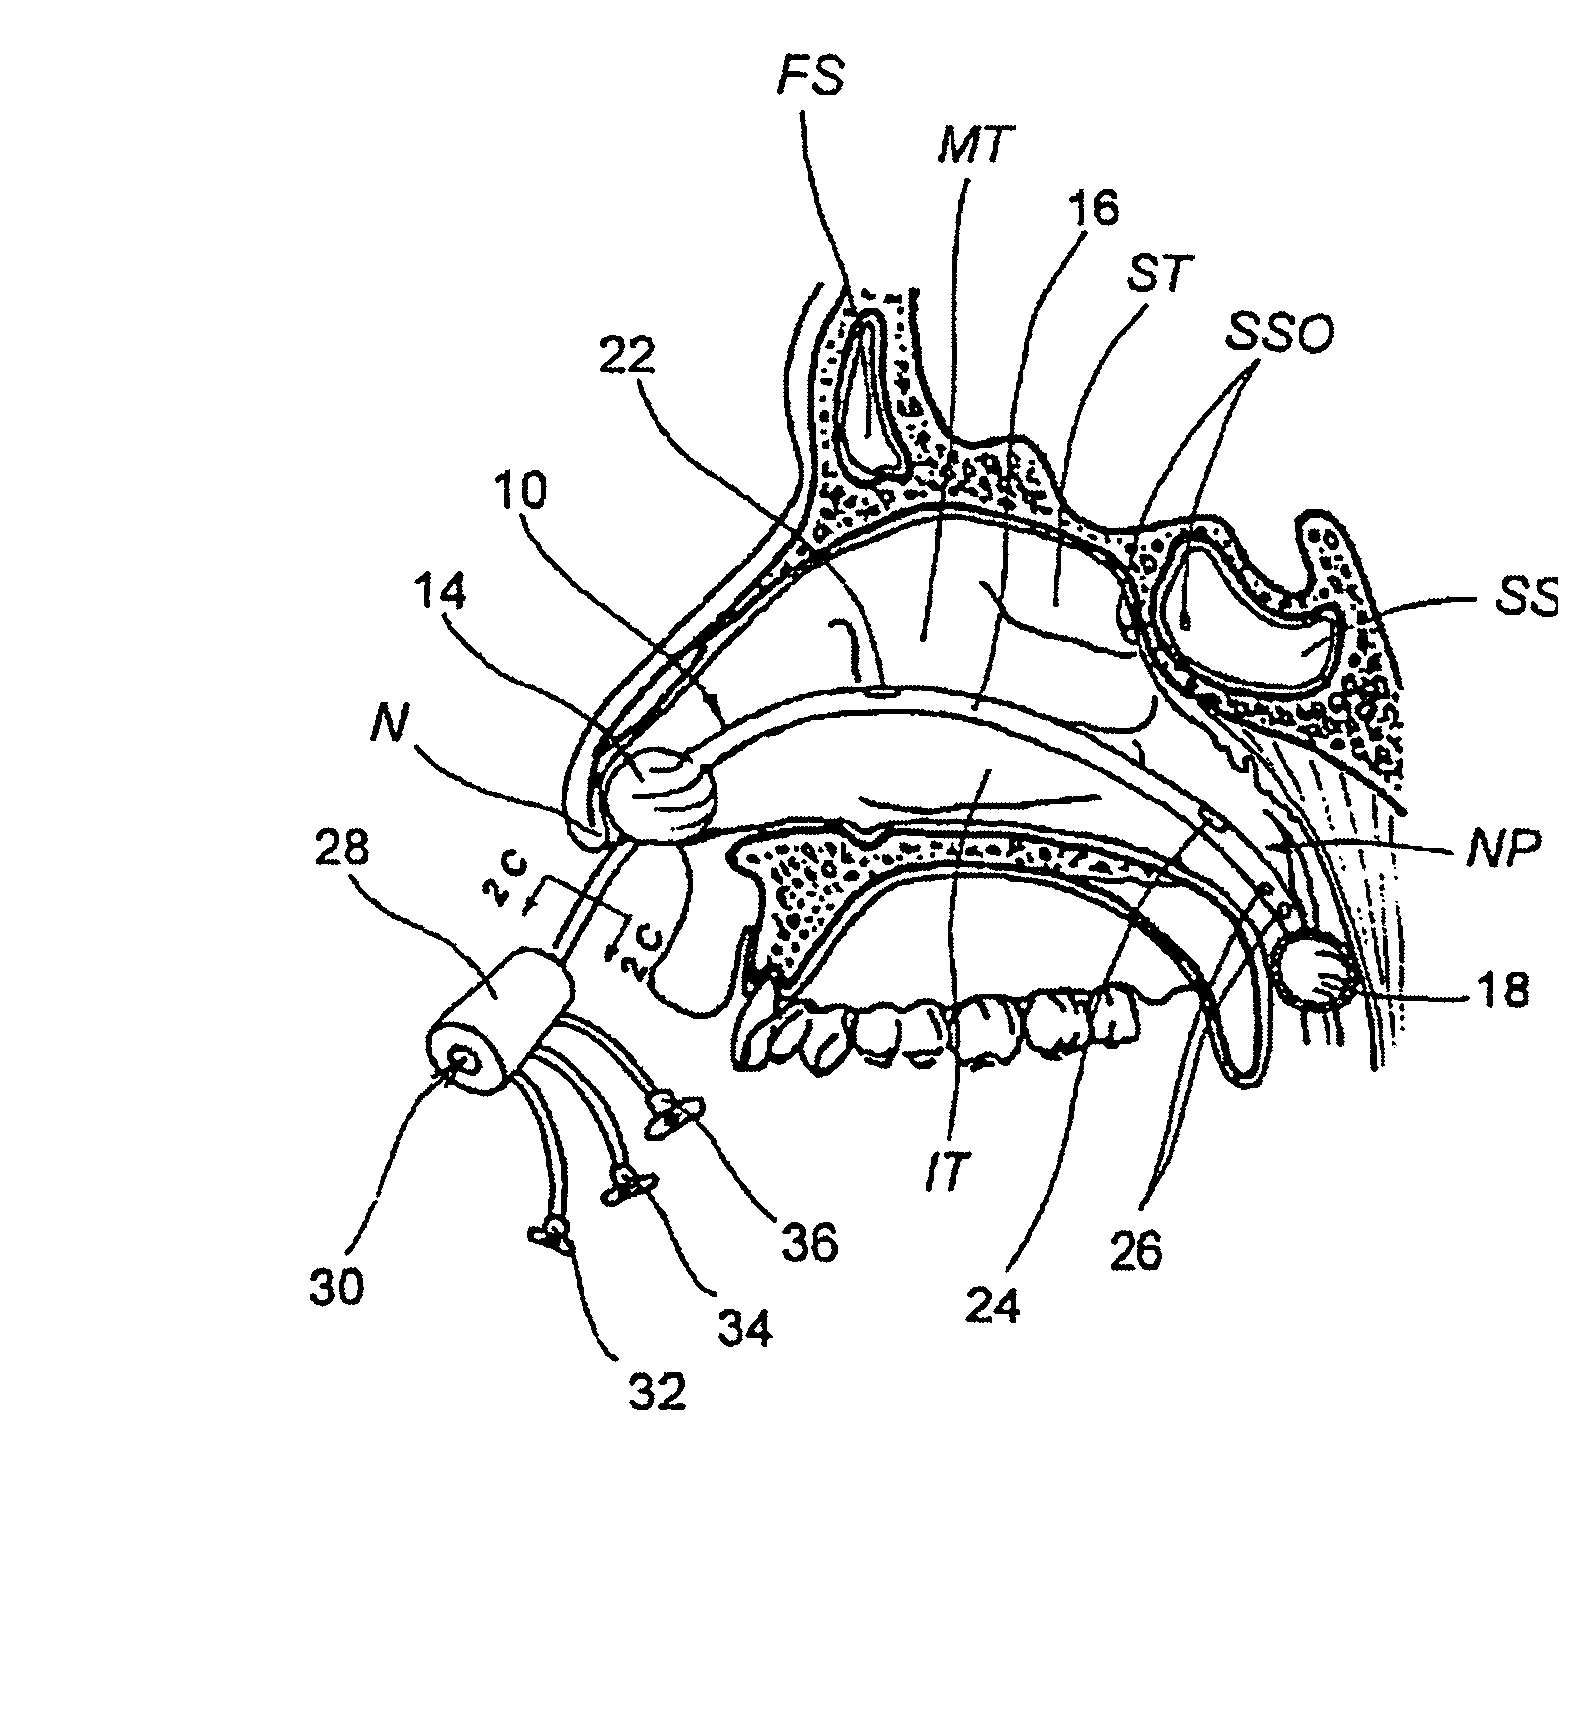 Devices, systems and methods for diagnosing and treating sinusitis and other disorders of the ears, nose and/or throat